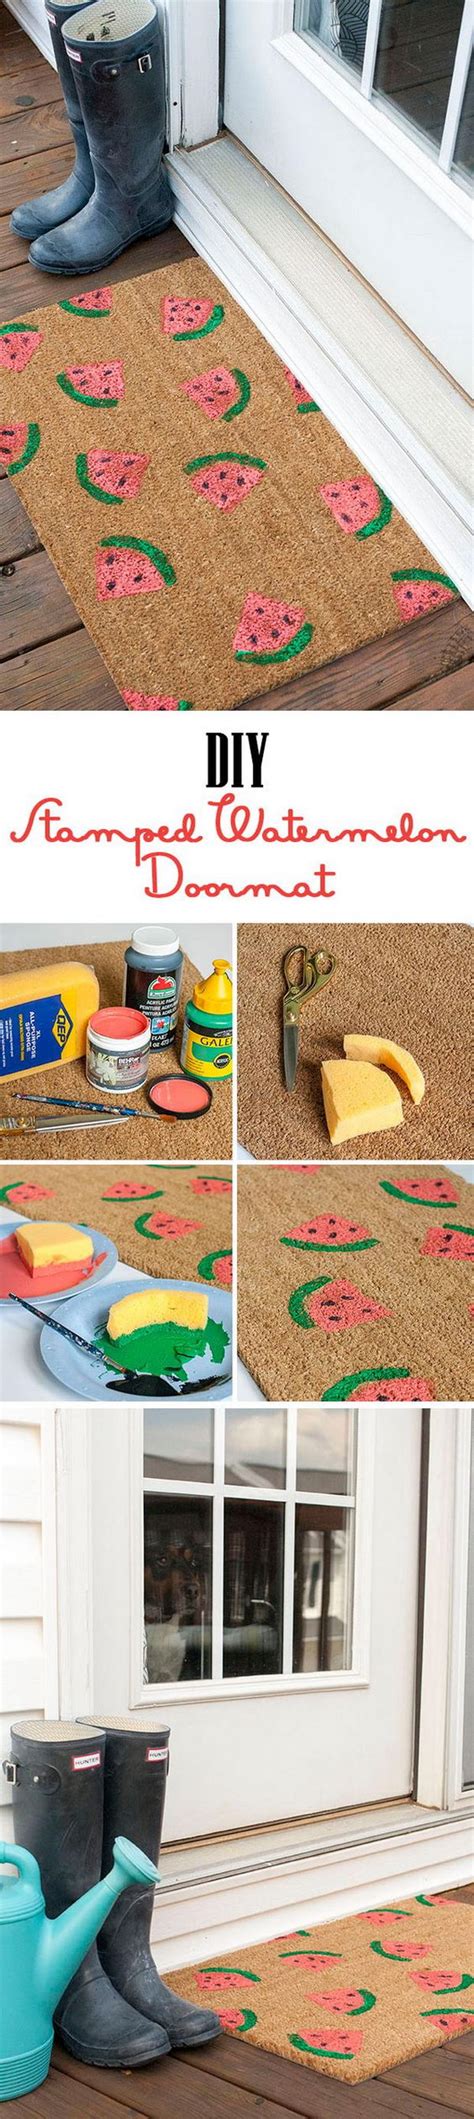 25 Fun And Easy Summer Diy Projects Hative